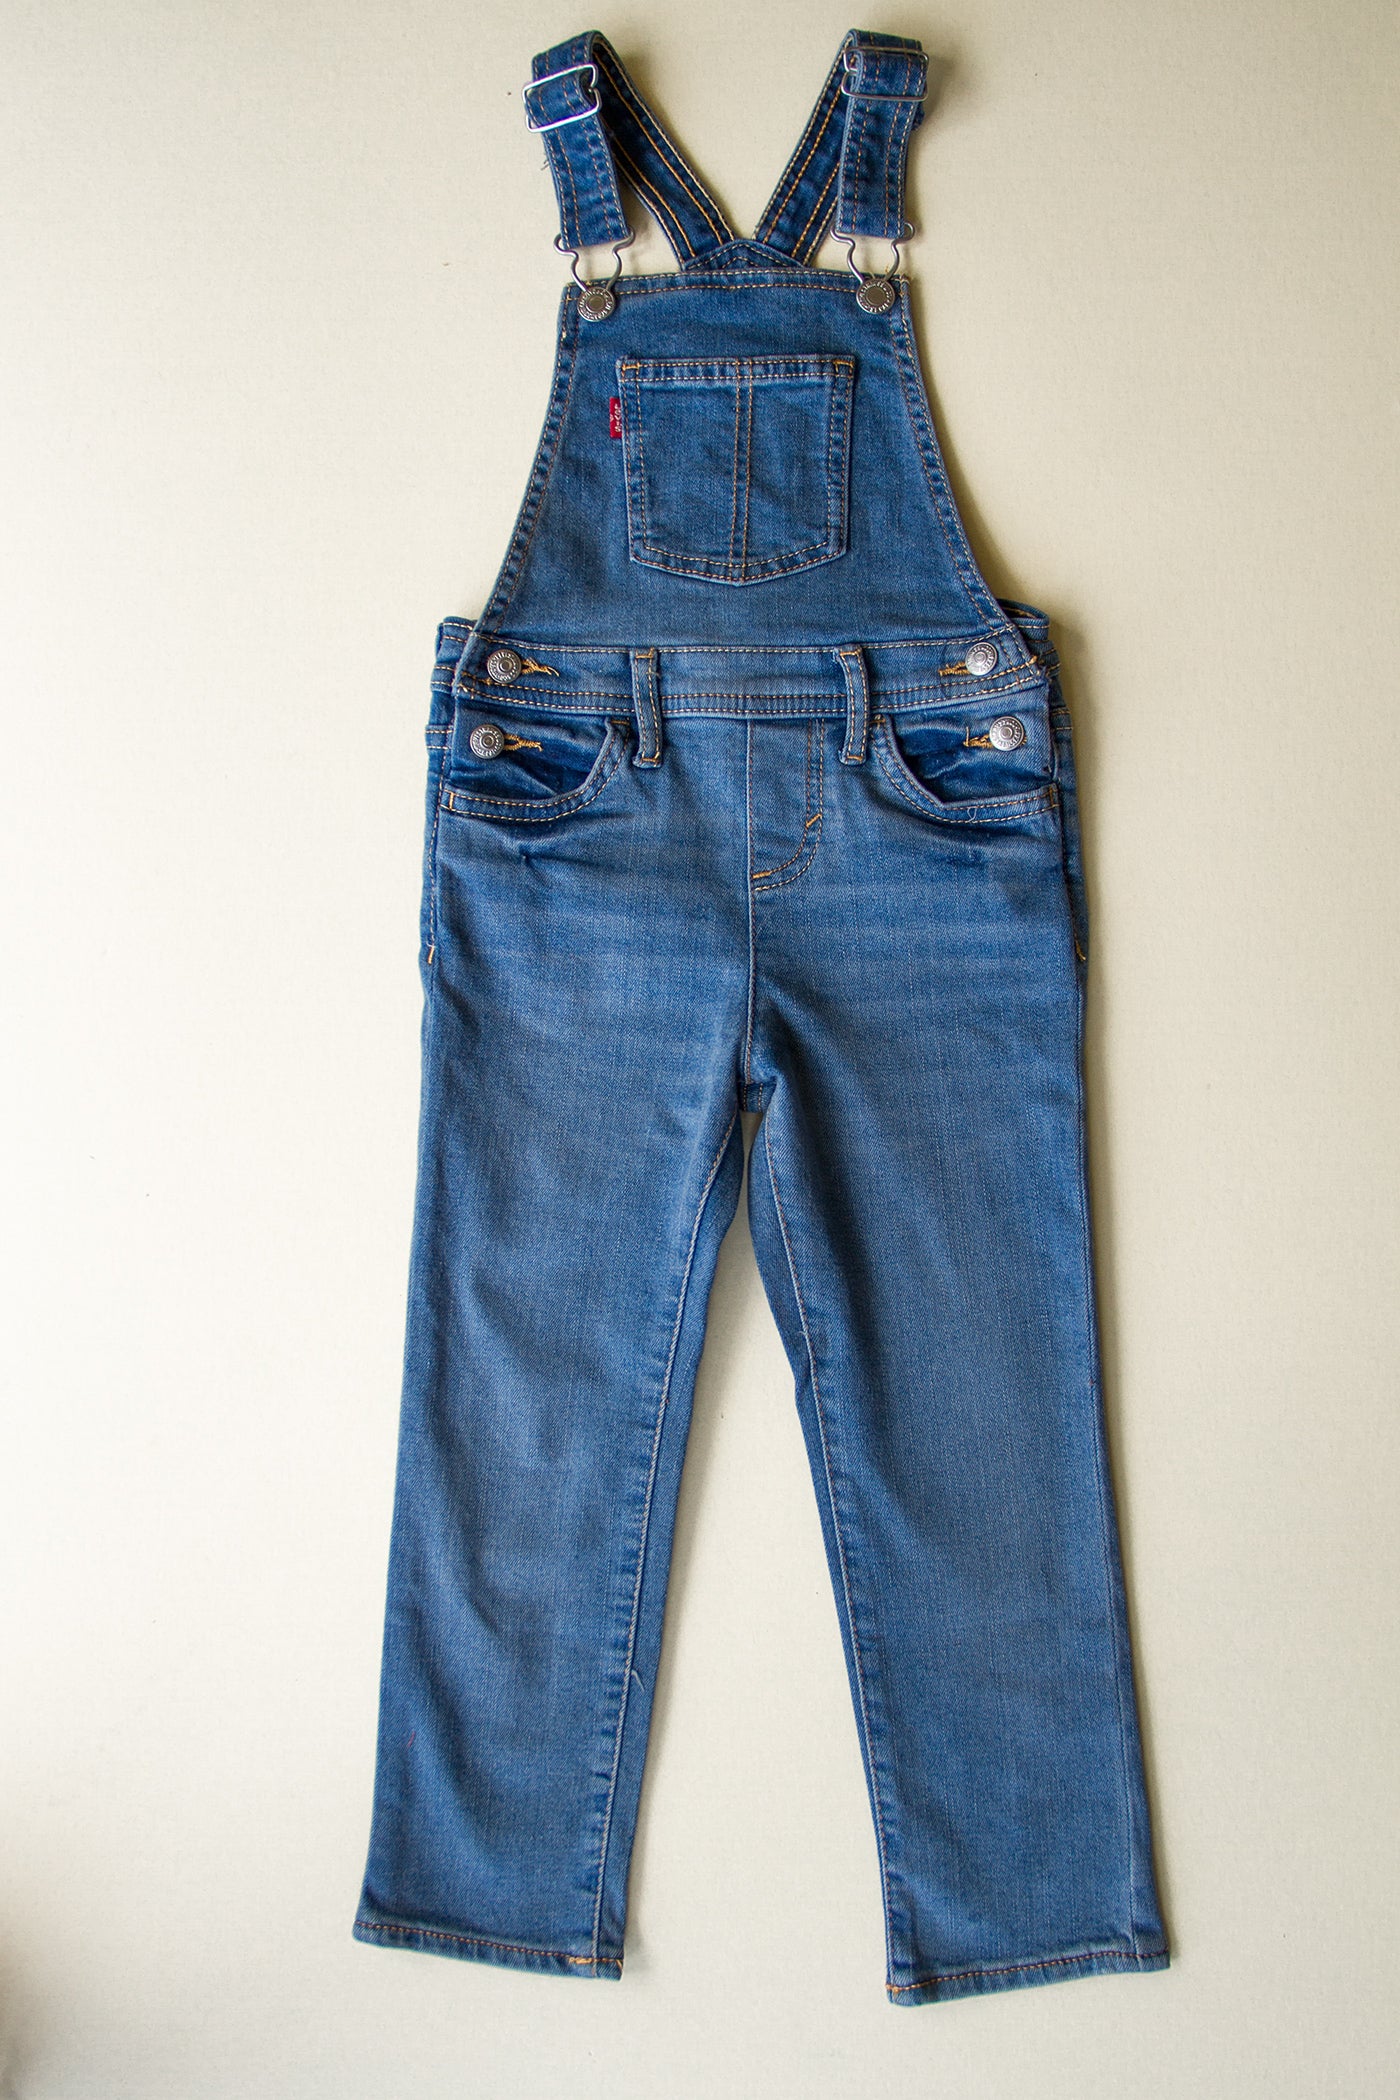 Girlfriend Kids Overalls by Levi's